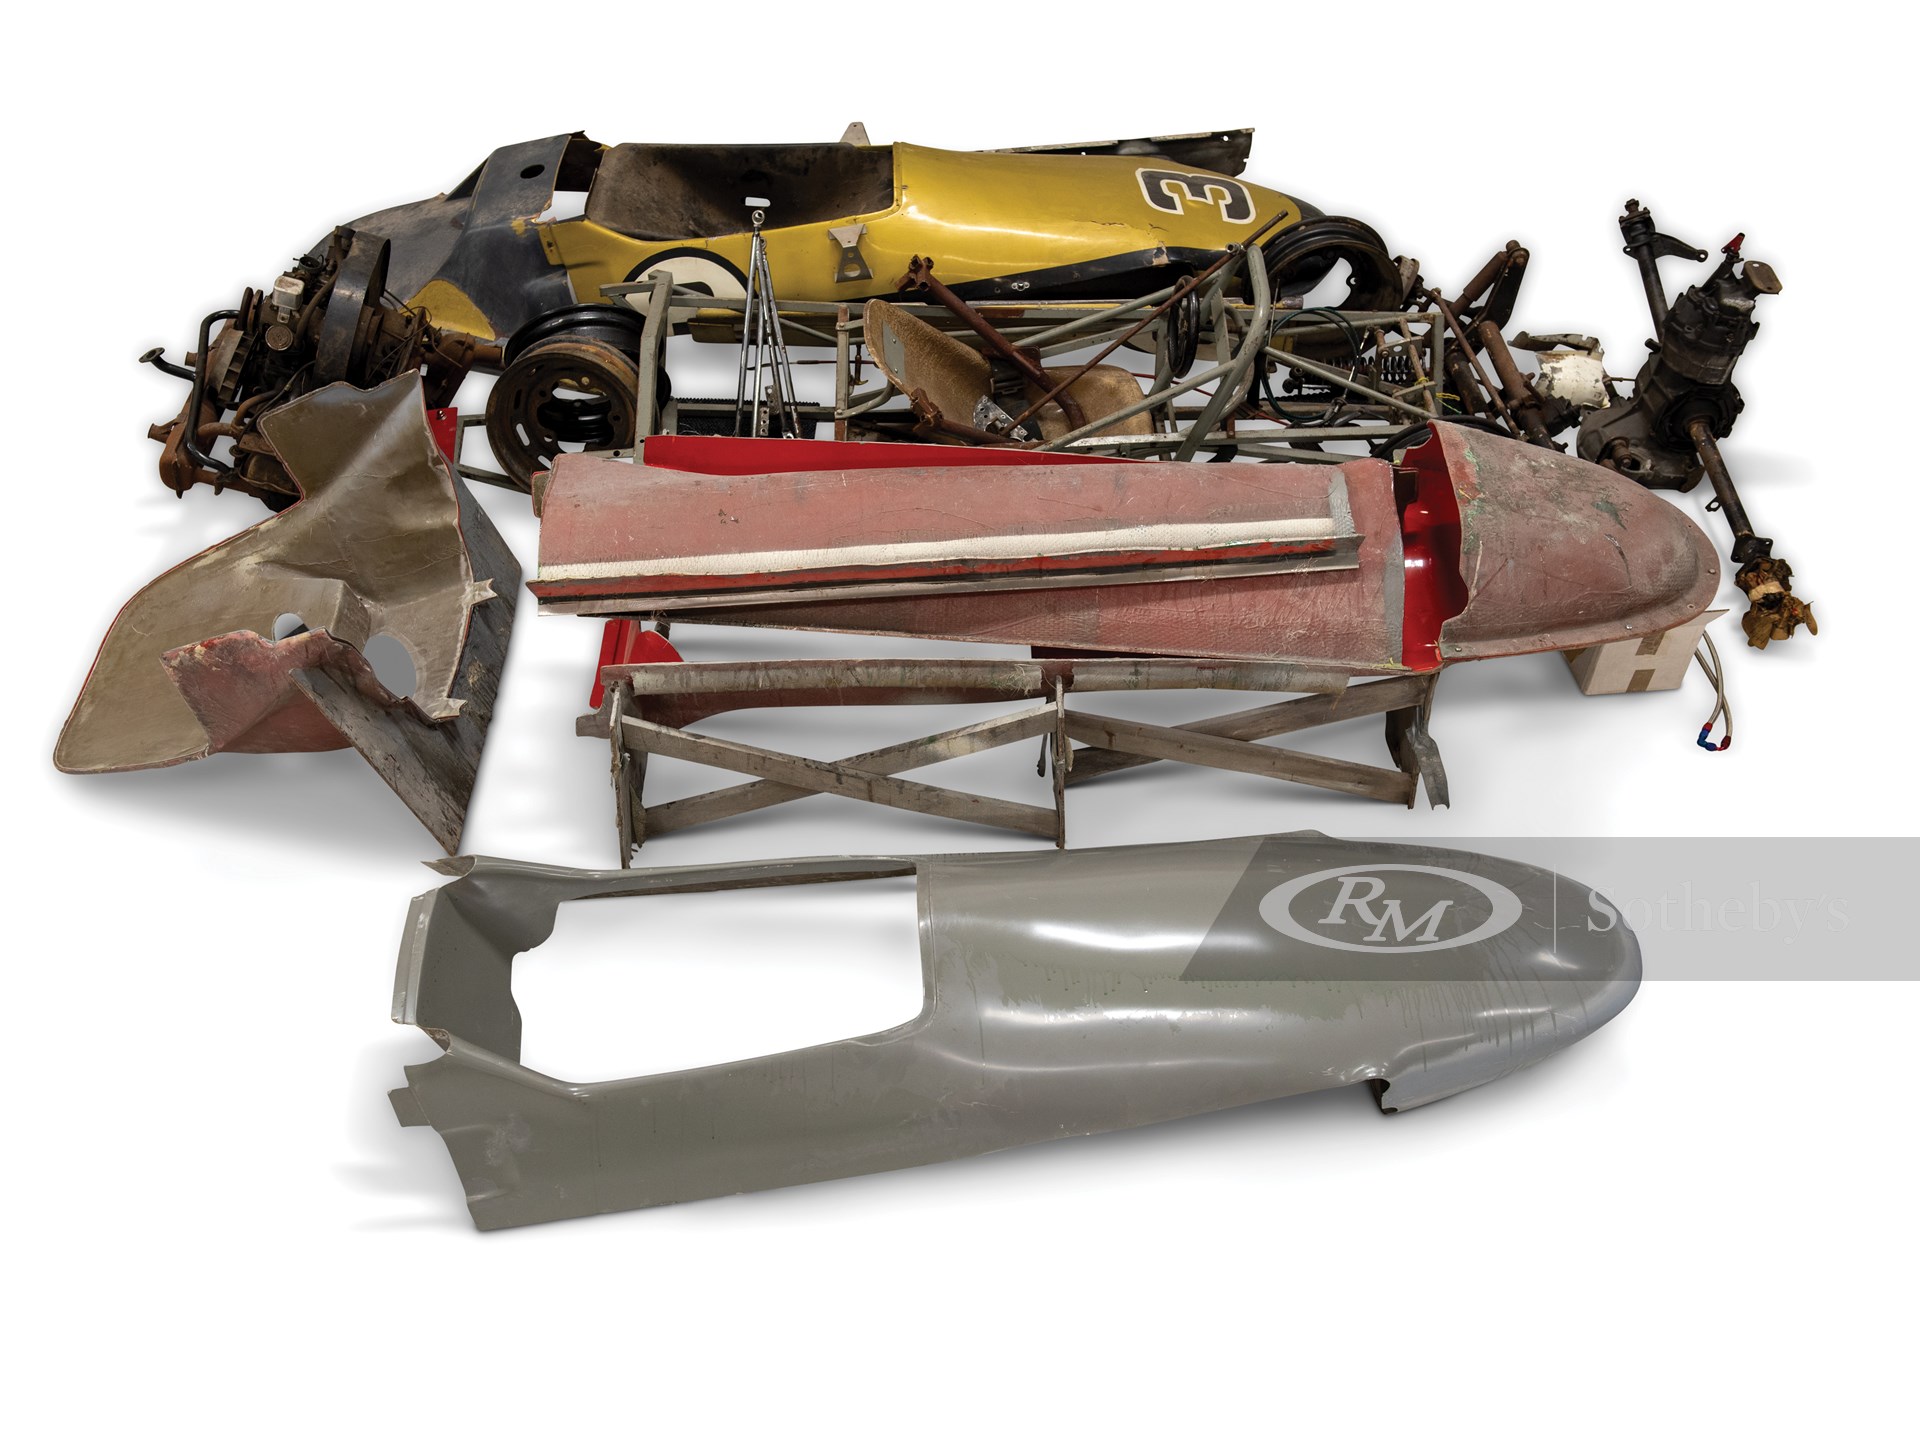 Formula Vee Project Including Body Mold The Elkhart Collection RM Sotheby S